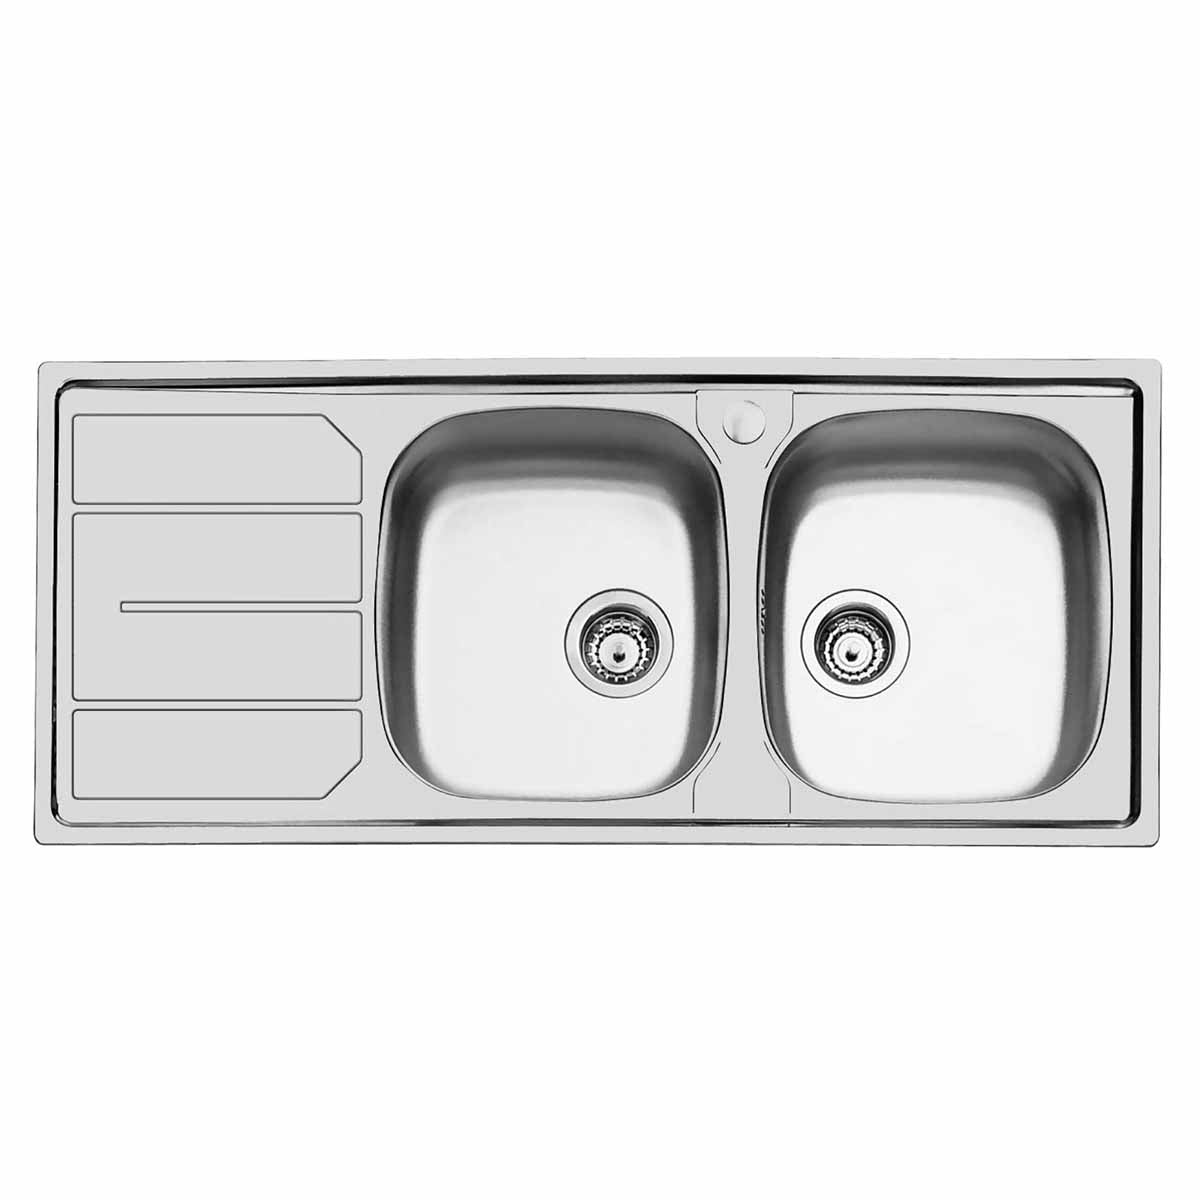 Foster S1000 Kitchen Sink with Draining Board Right Handed 1160x500mm Brushed Stainless Steel